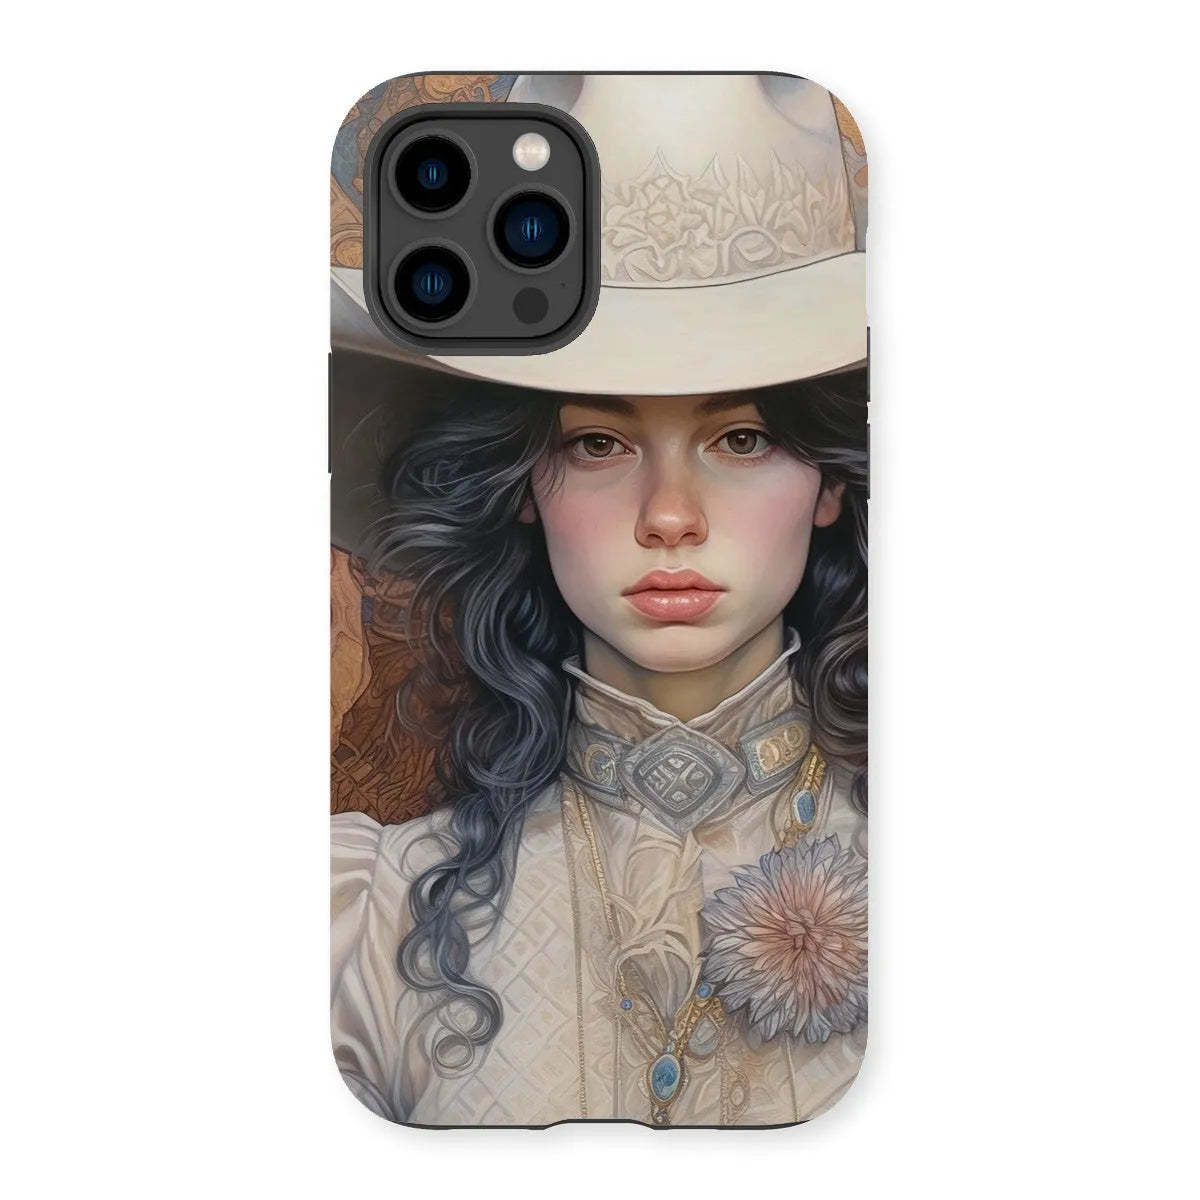 Helena The Lesbian Cowgirl - Sapphic Art Phone Case - Iphone 14 Pro / Matte - Mobile Phone Cases - Aesthetic Art